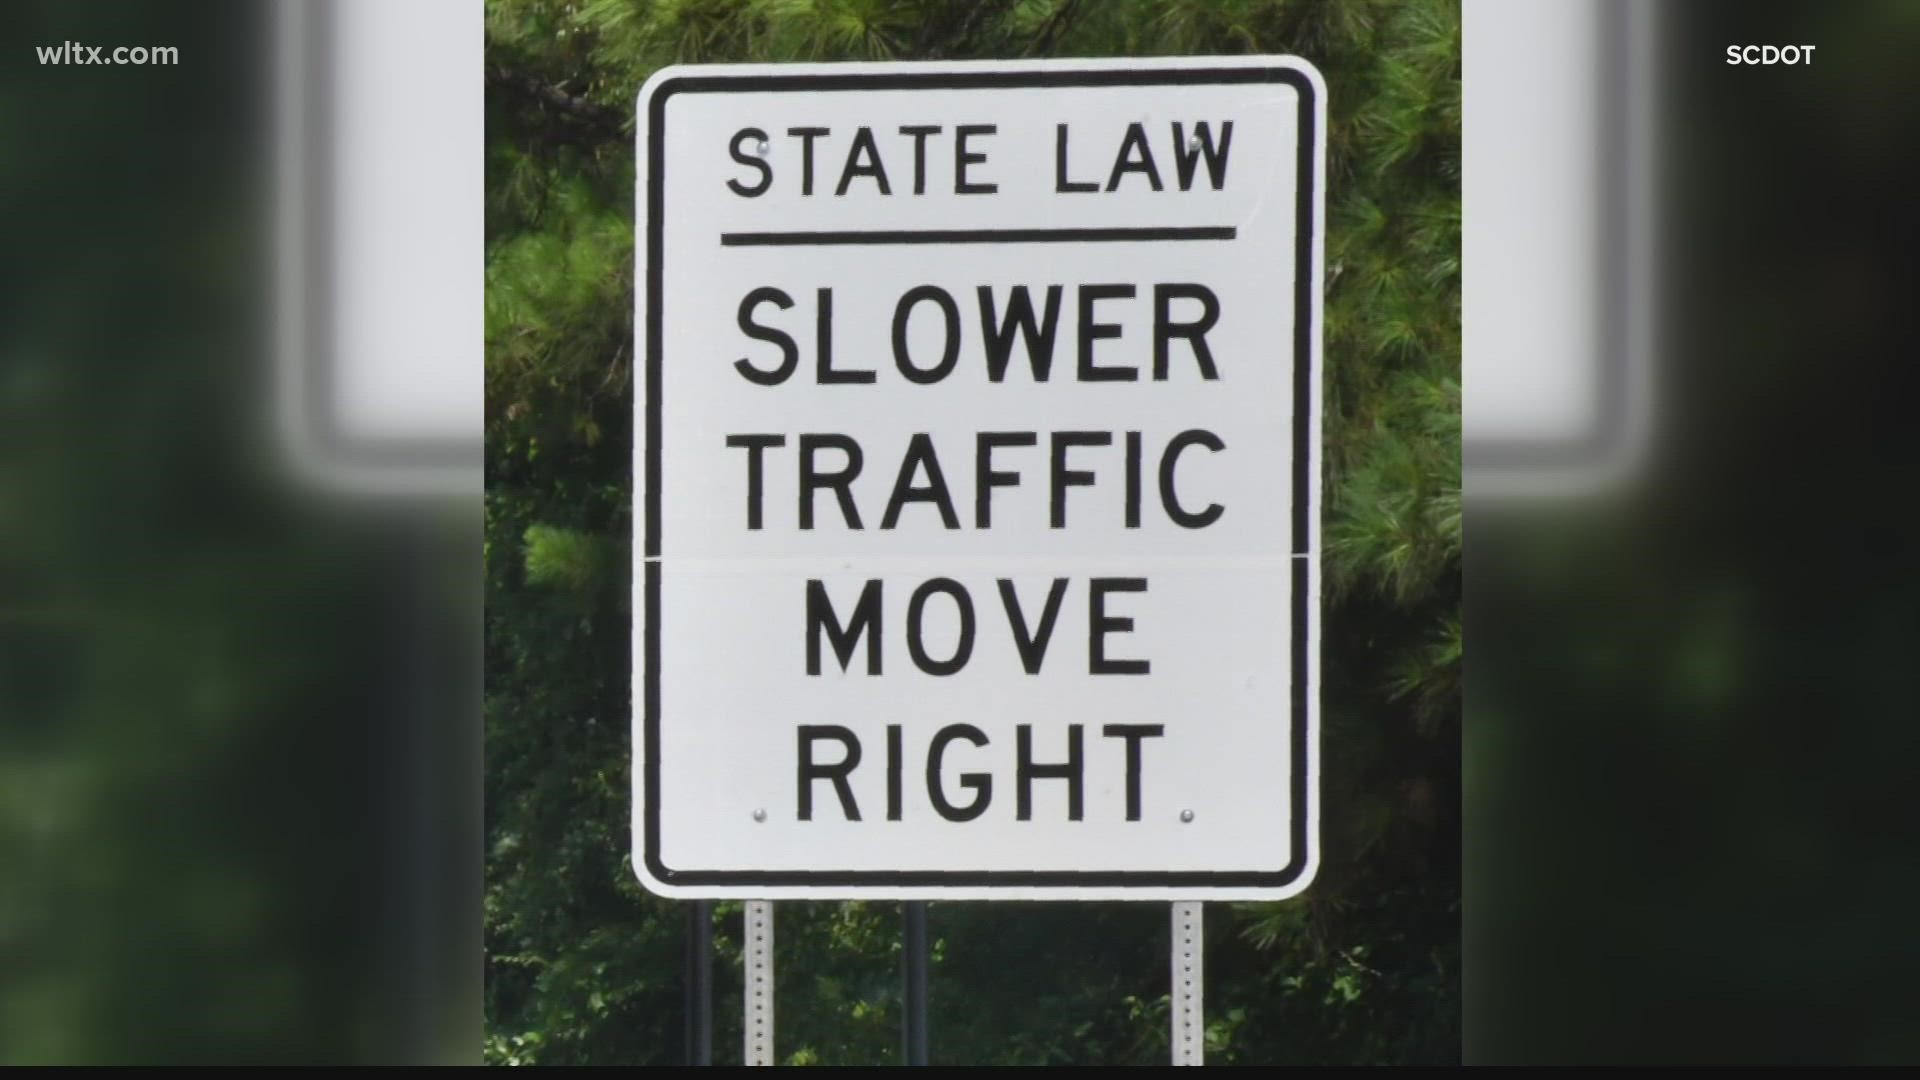 A new state law taking effect this month requires drivers to move out of left lanes of highways when a faster driver is approaching from behind.